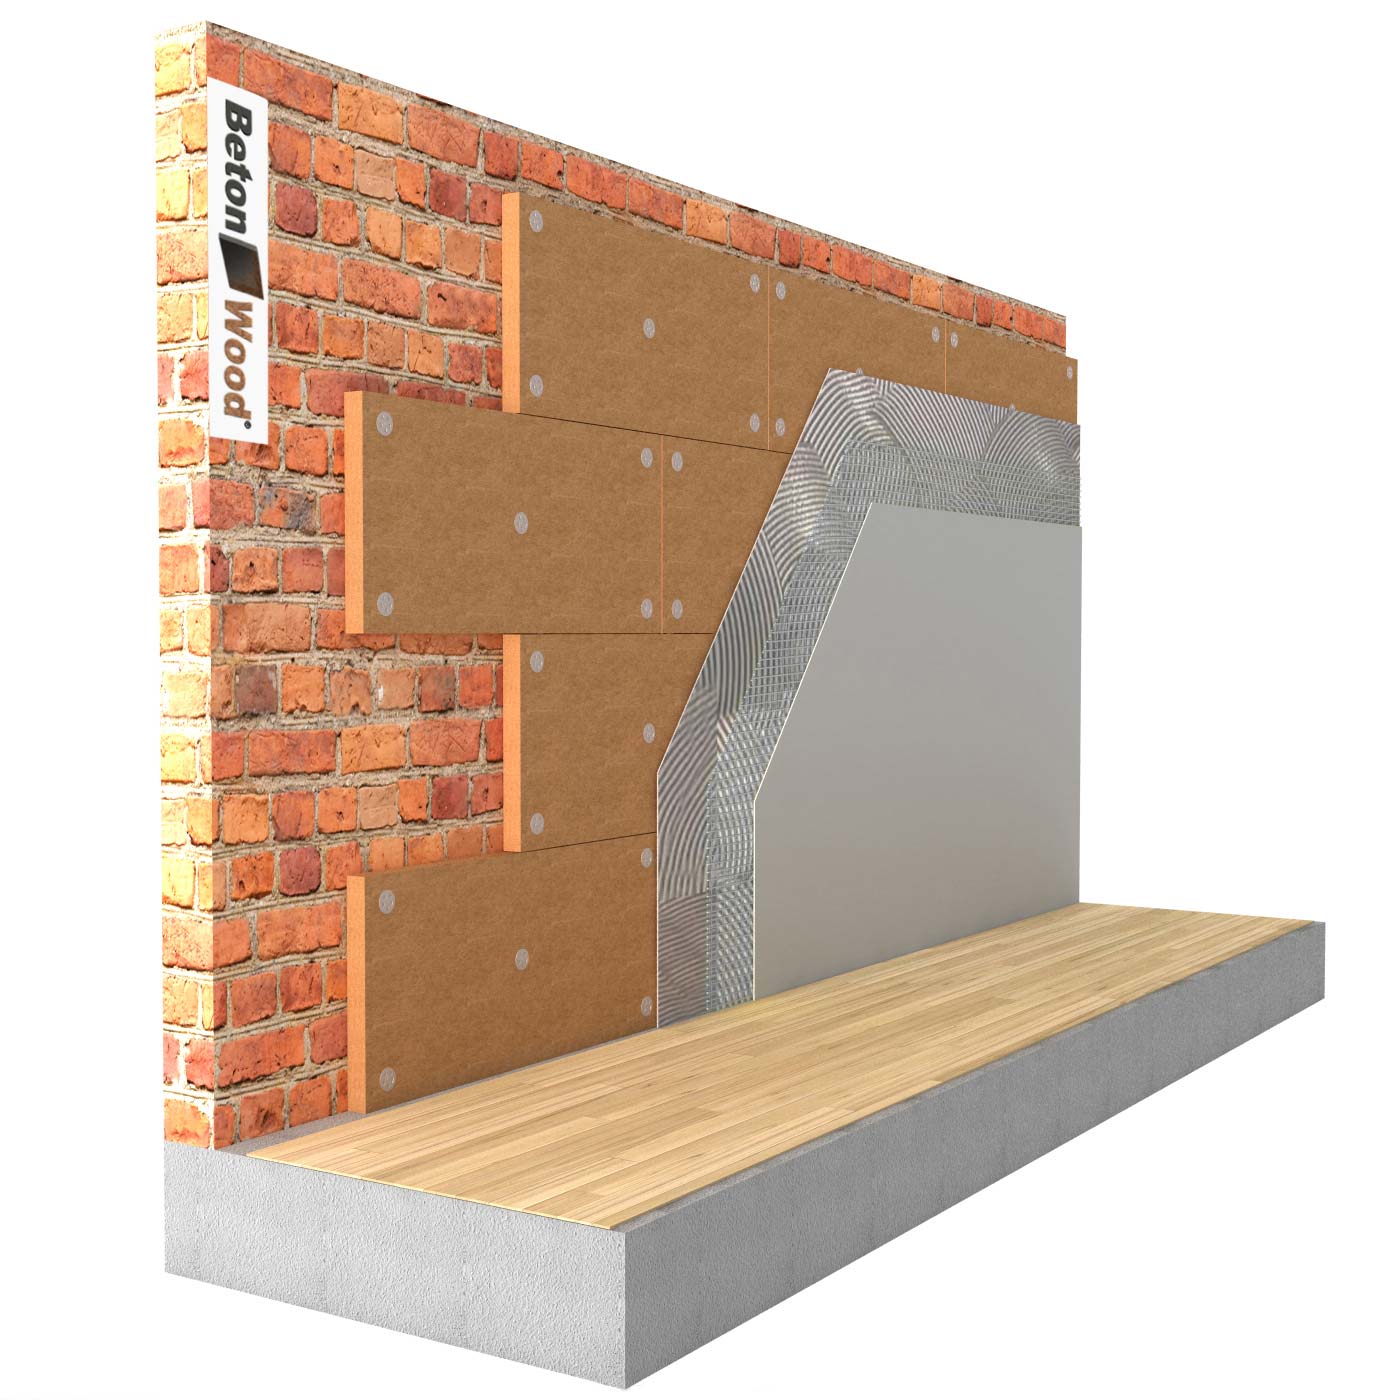 Internal thermal insulation system in Protect Fiber Wood